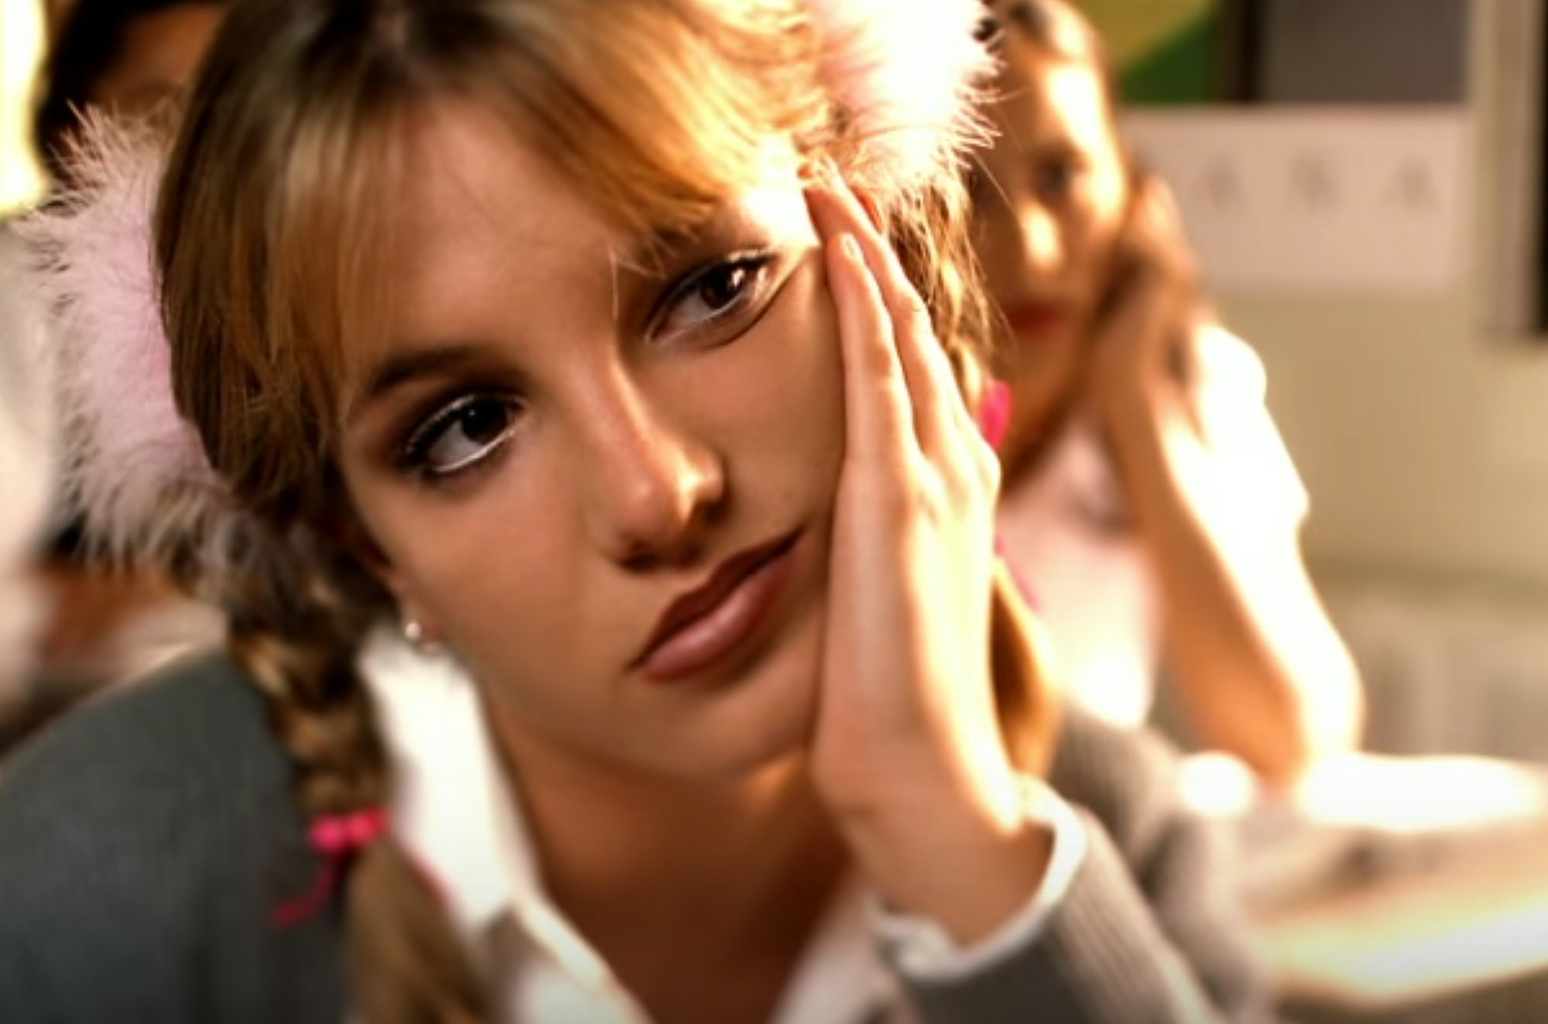 britney-spears-baby-one-more-time-vid-billboard-1548